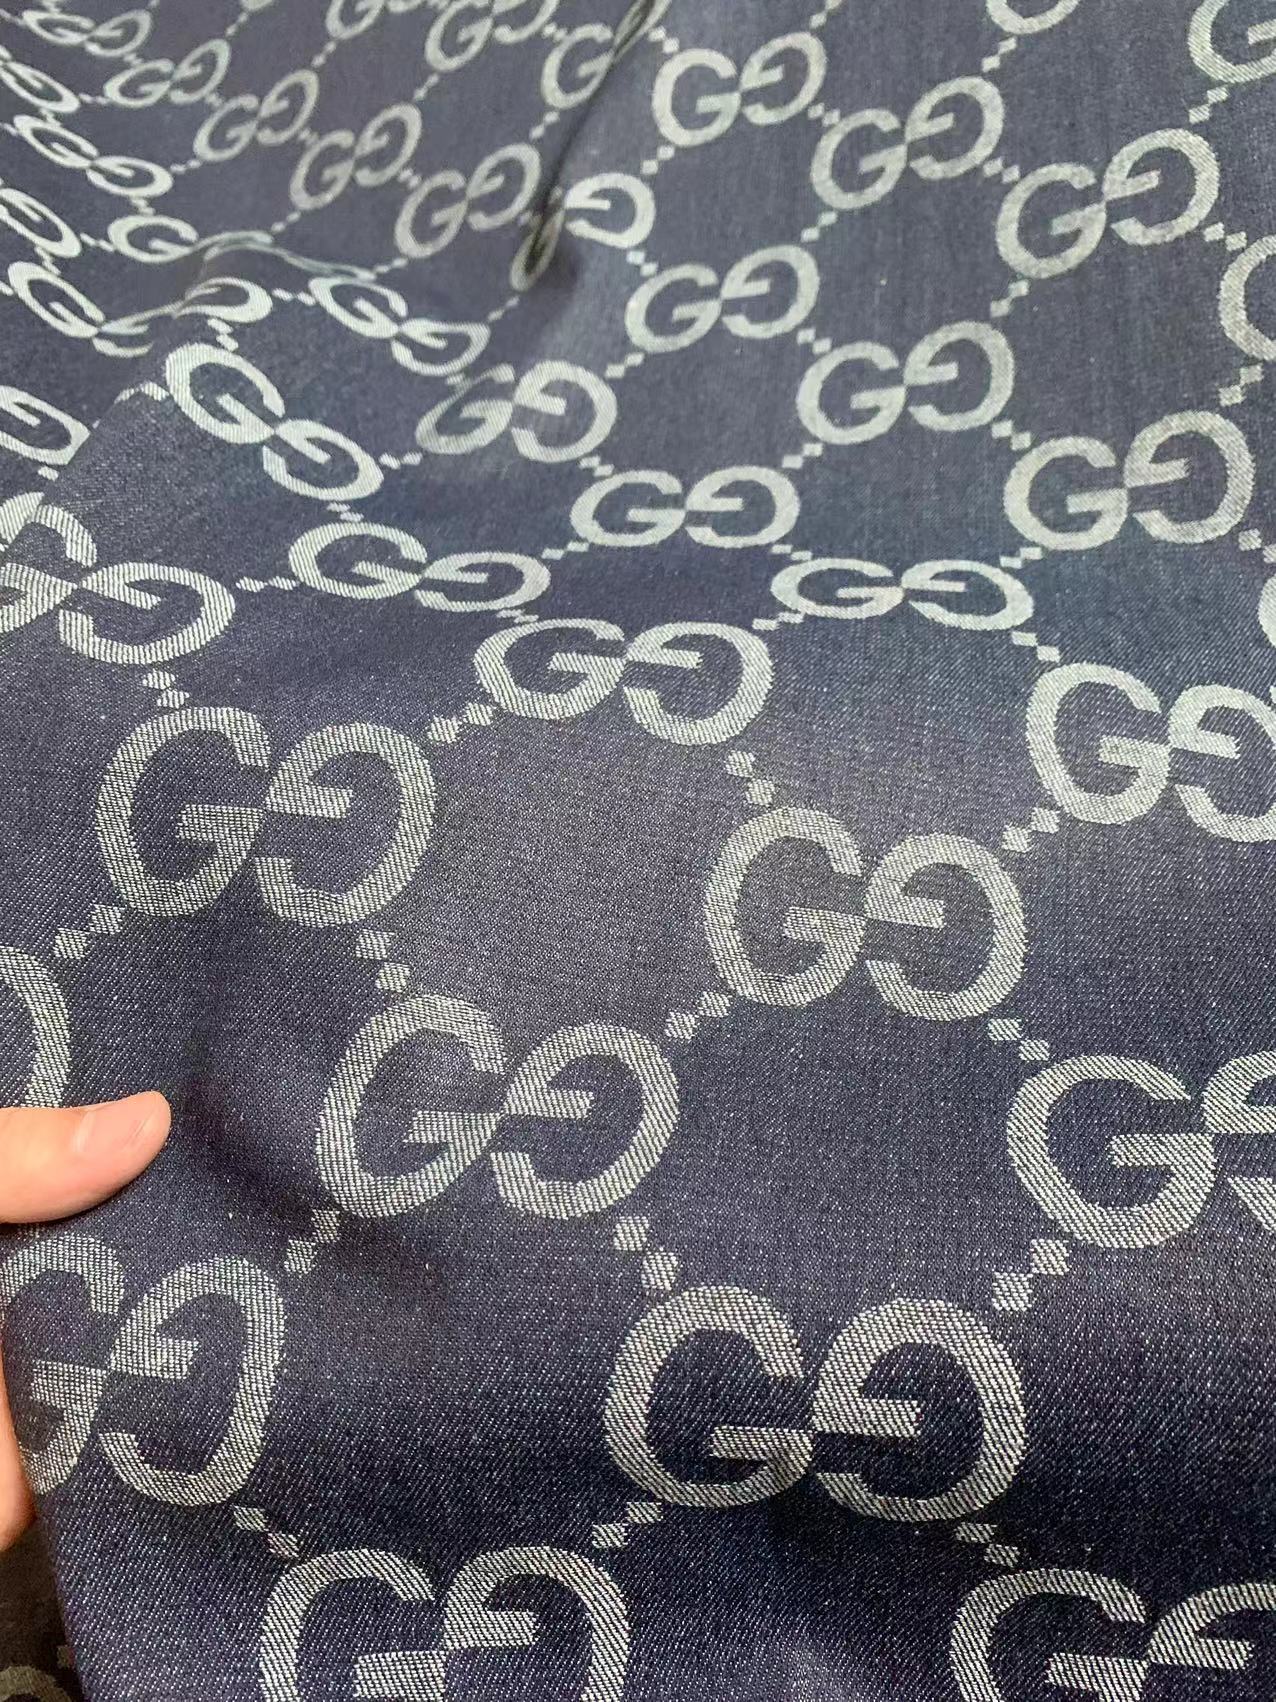 Classic 2 Inch Original 100% Cotton Gucci Denim Woven Jacquard fabric , Jean fabric For Handmade Apparel, Upholstery By Yard